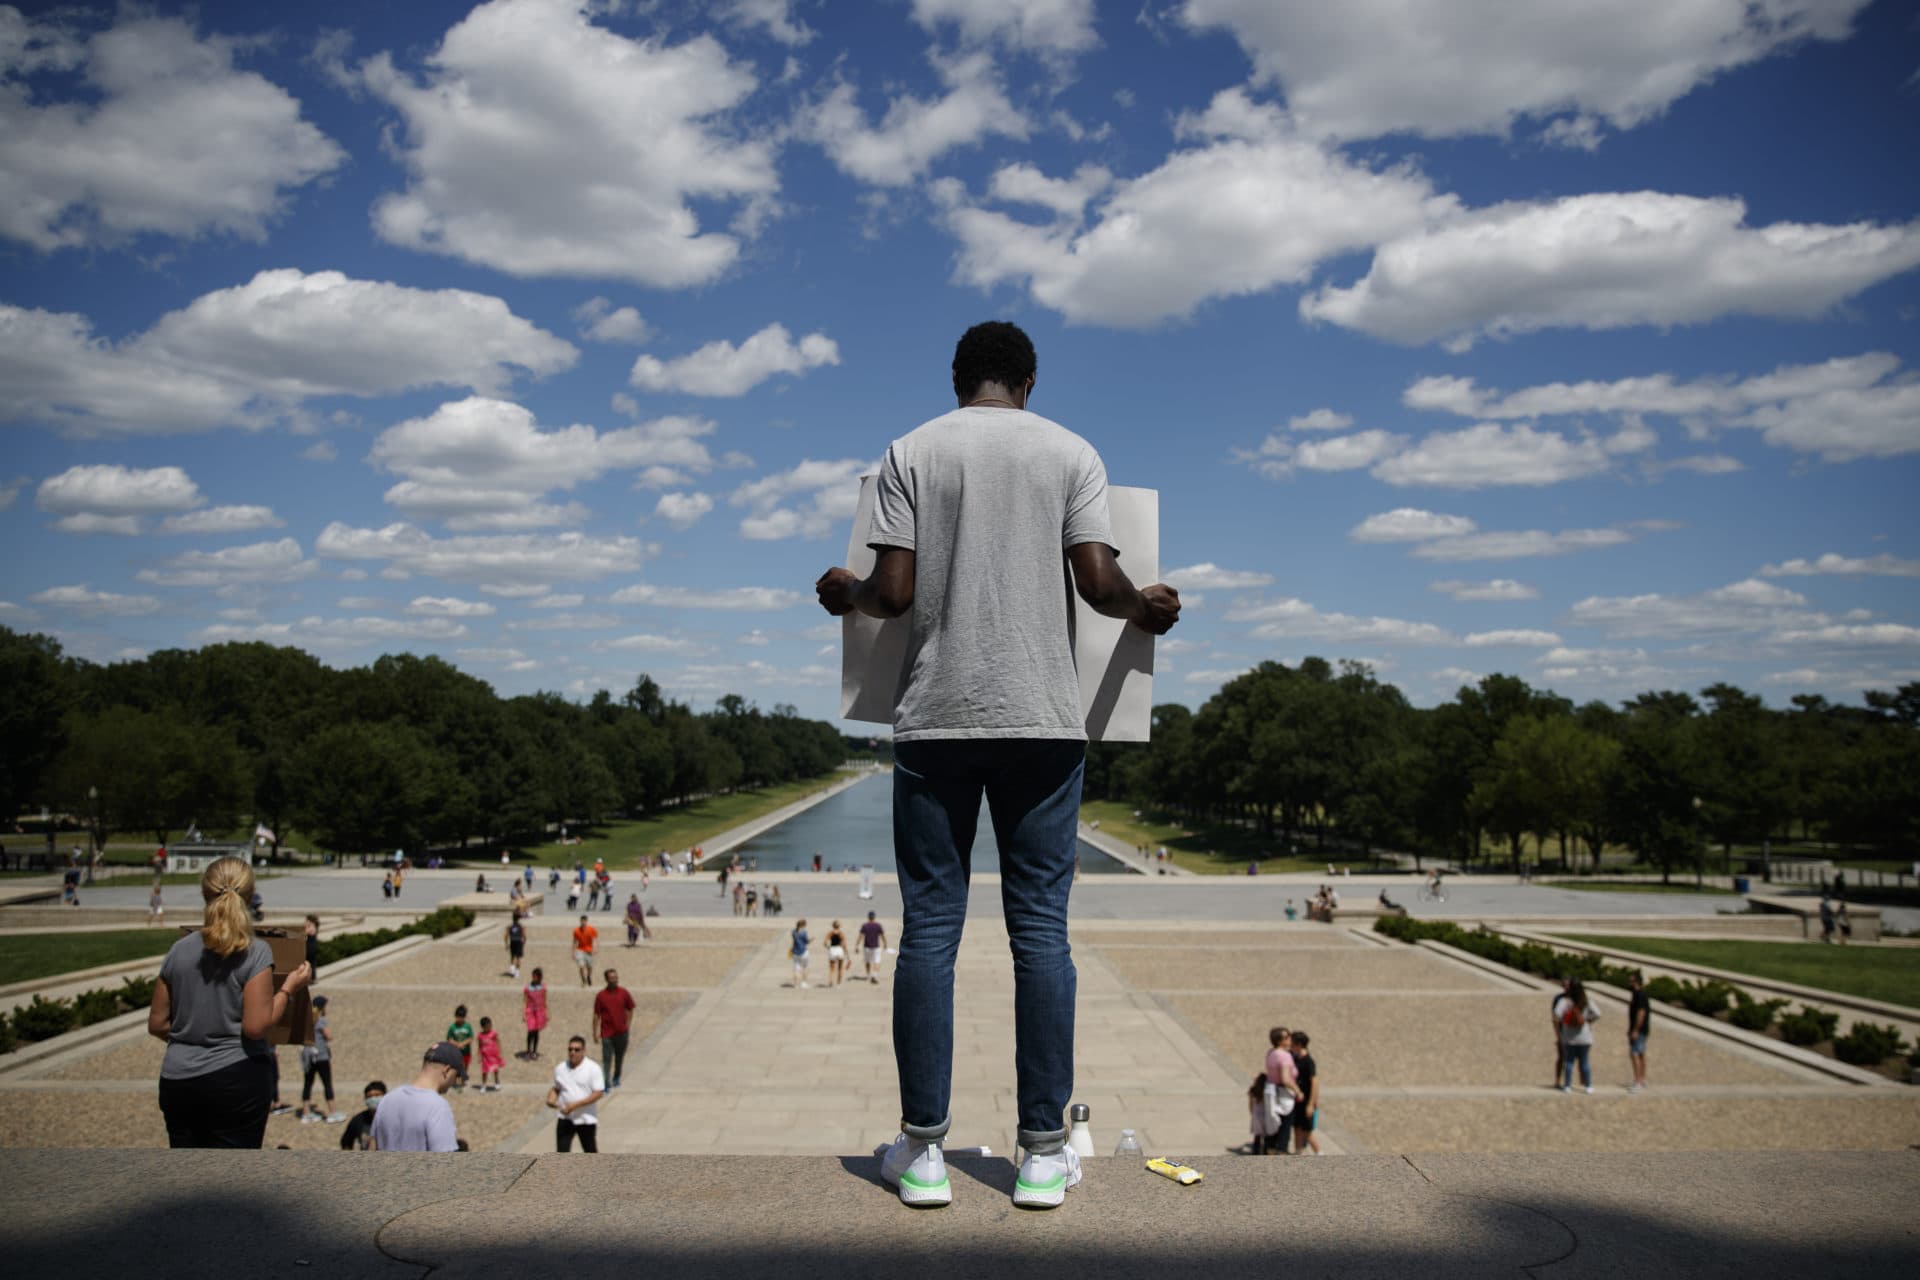 Yinka Onayemi holds a sign as he stands quietly on the steps of the Lincoln Memorial looking out over the National Mall in Washington, Sunday, May 31, 2020, to protest the death of George Floyd. Floyd died after being restrained by Minneapolis police officers. (AP Photo/Carolyn Kaster)